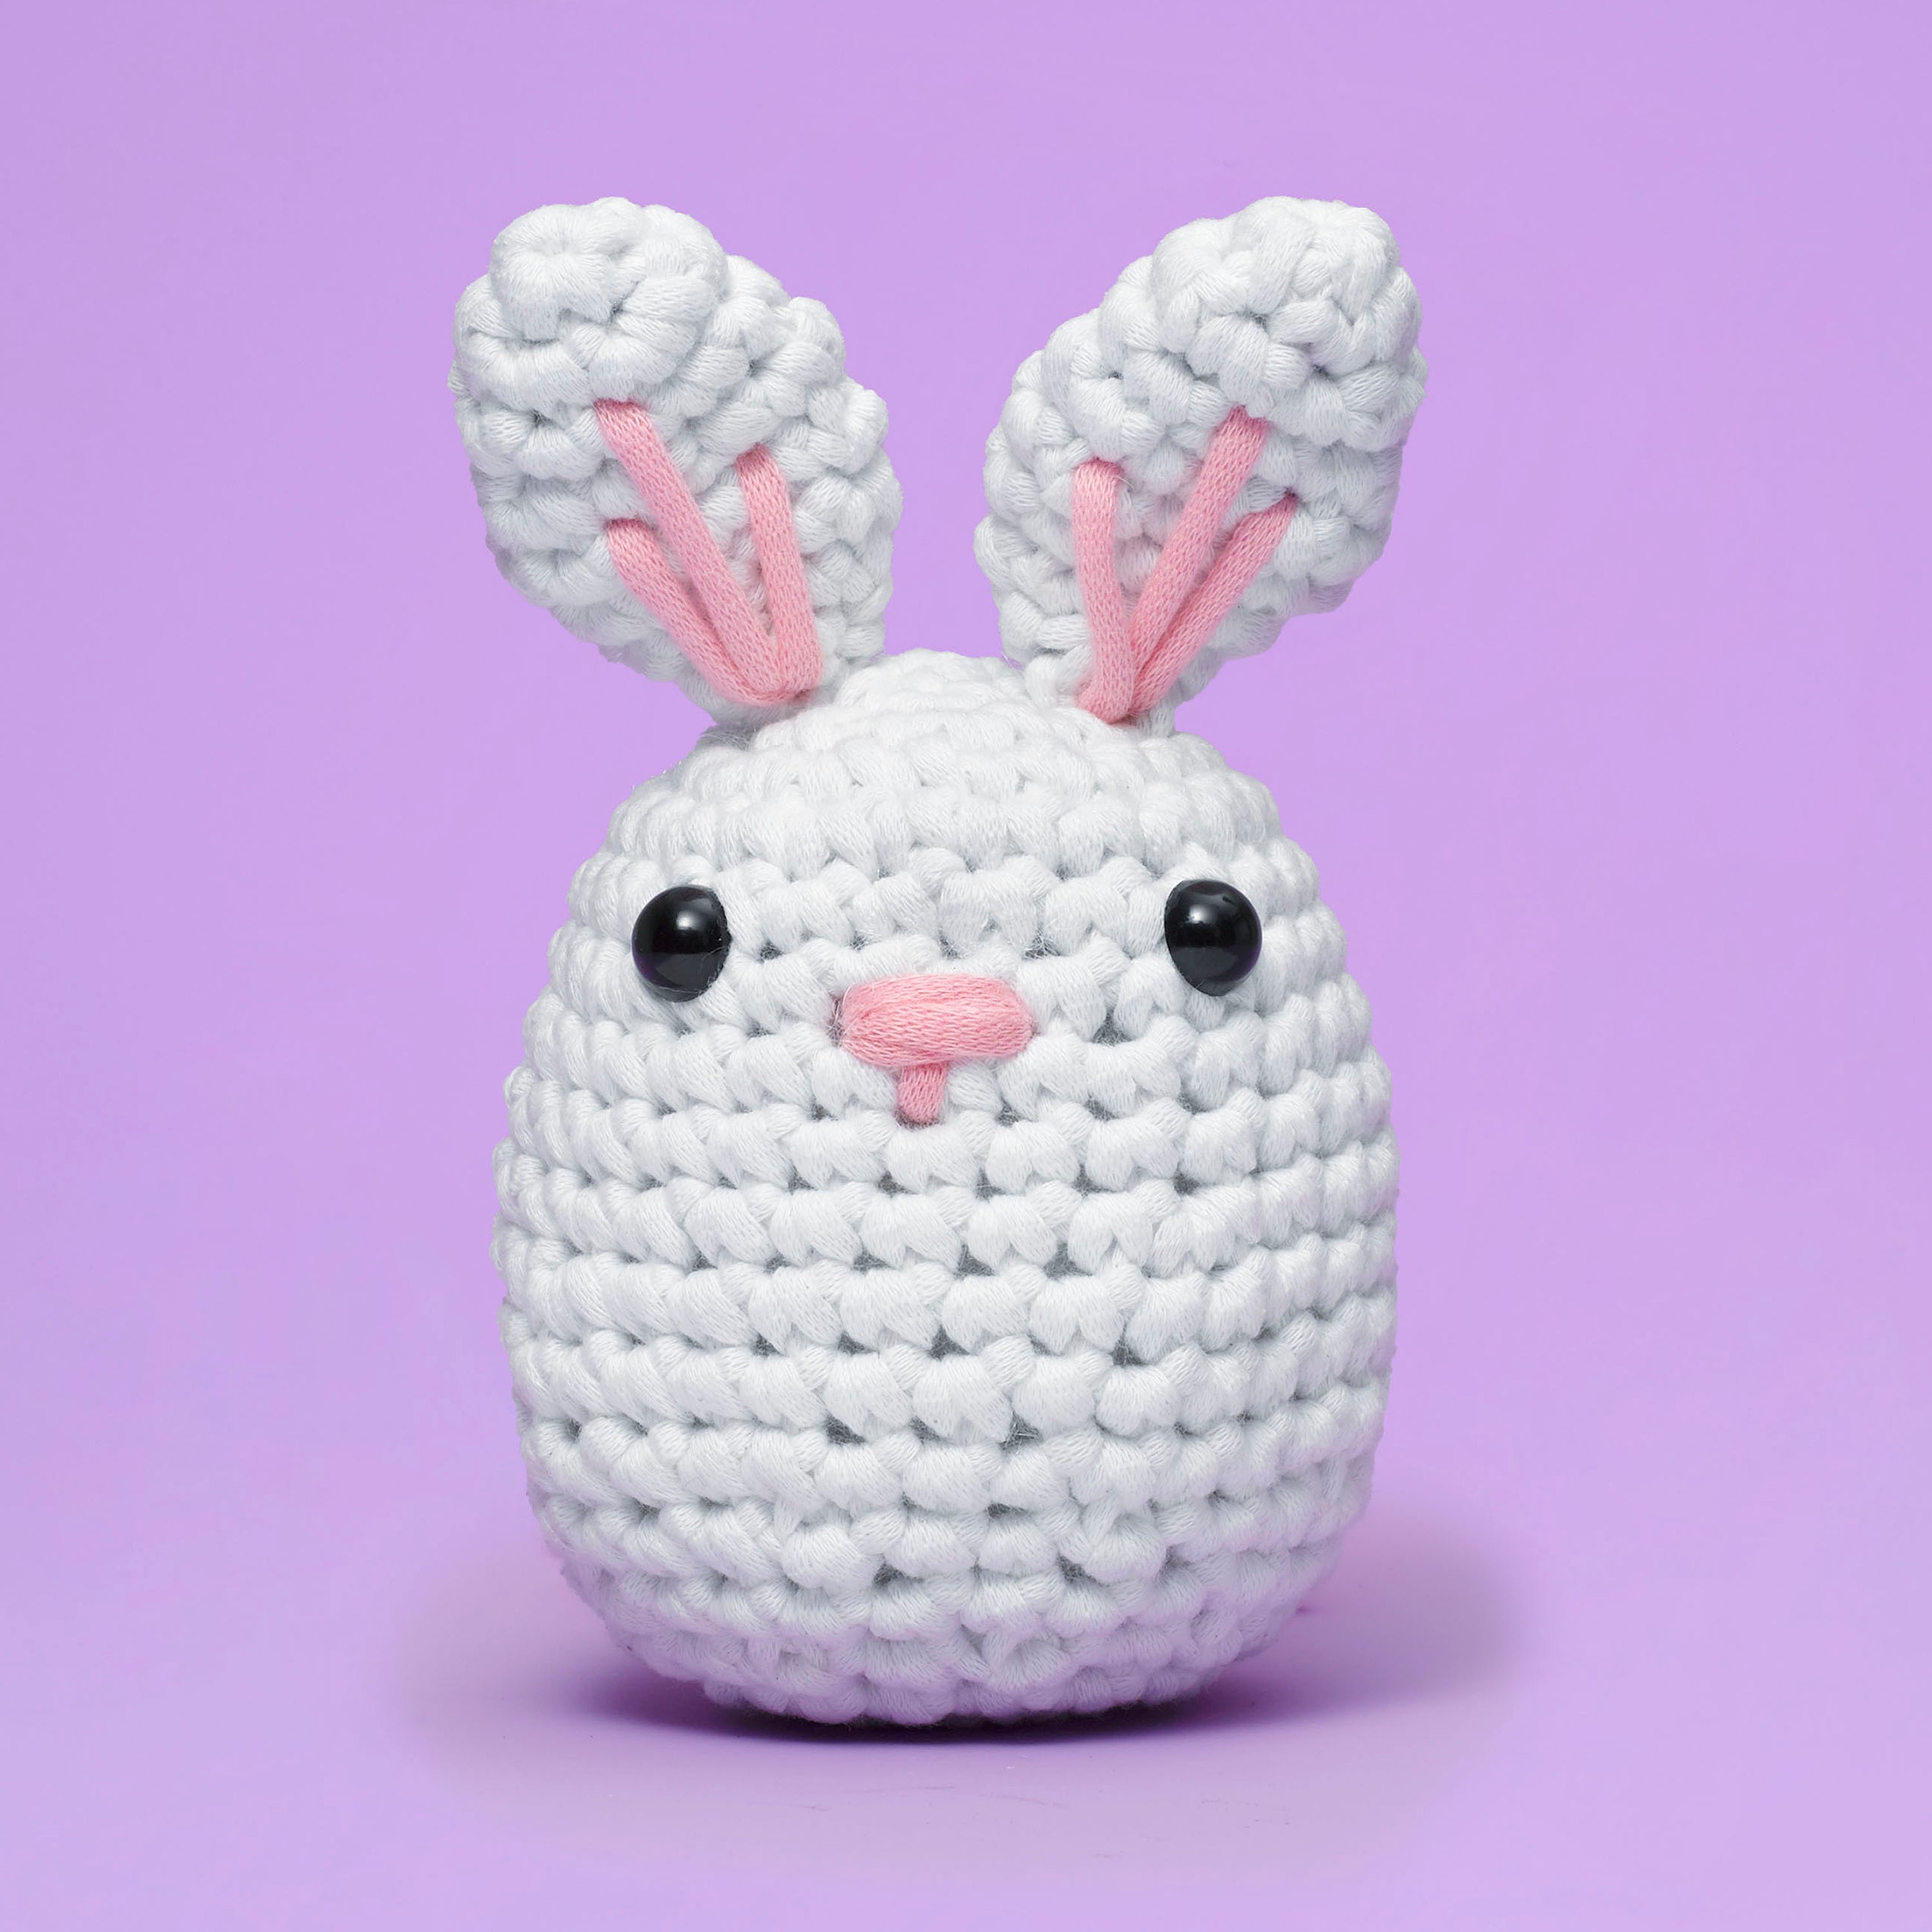 How to crochet amigurumi for beginners – The Woobles